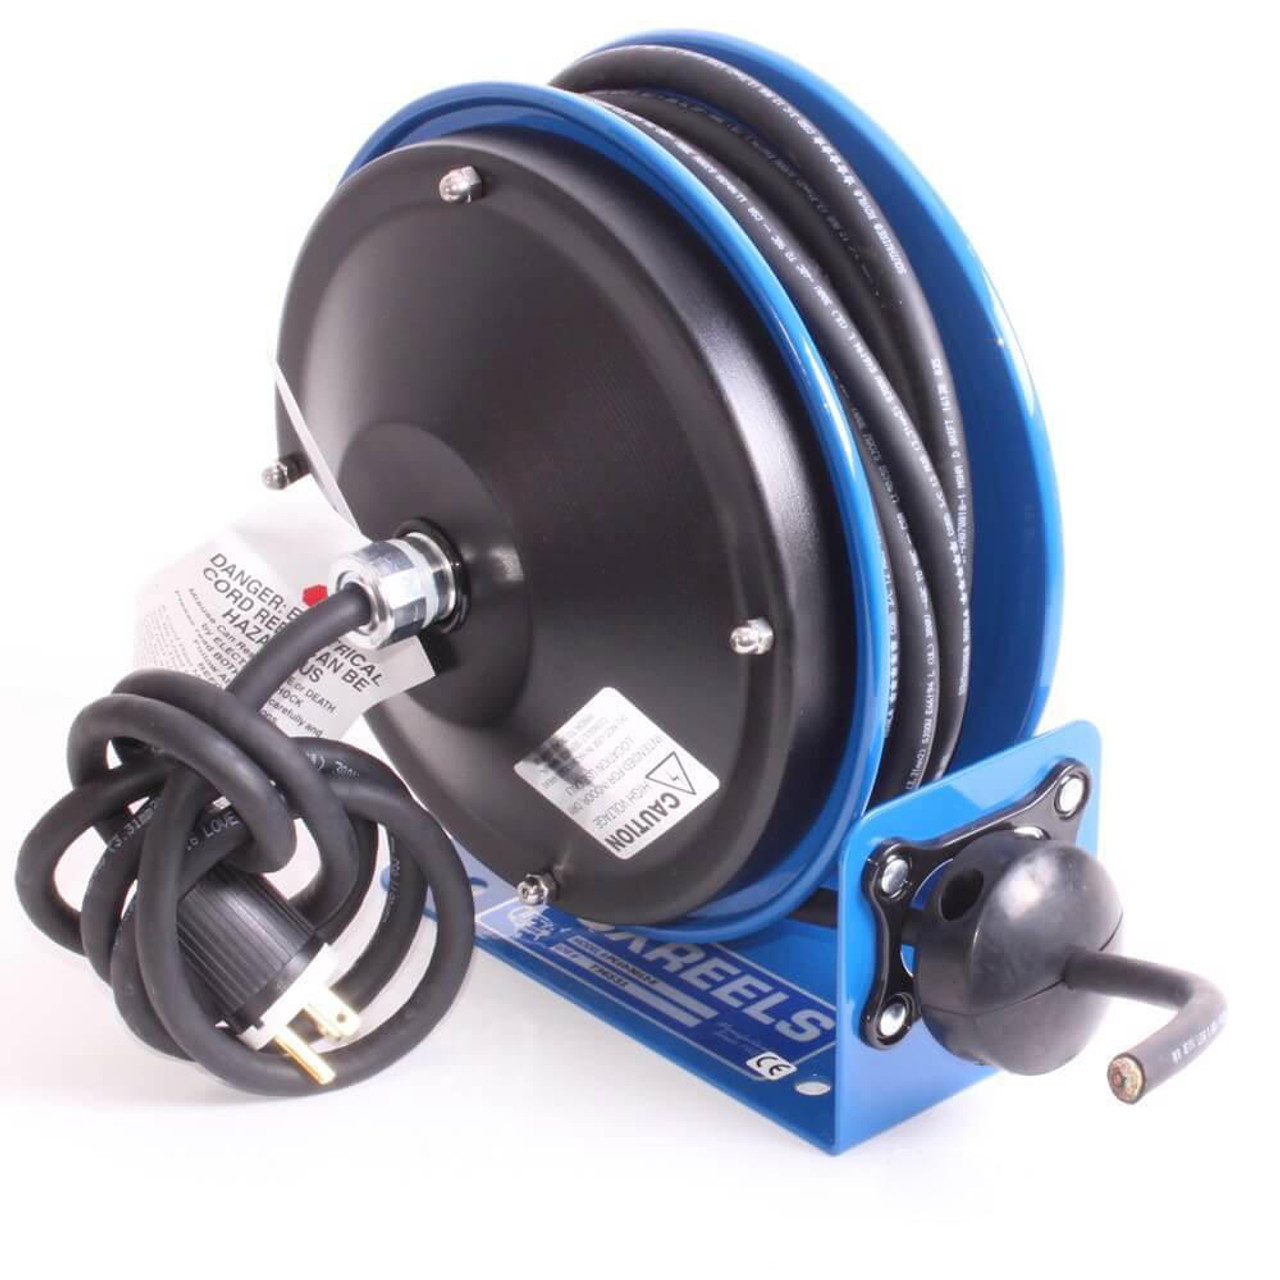 Coxreels PC10-3012-A PC10 Series Power Cord Reels, 12/3 AWG, 20 A